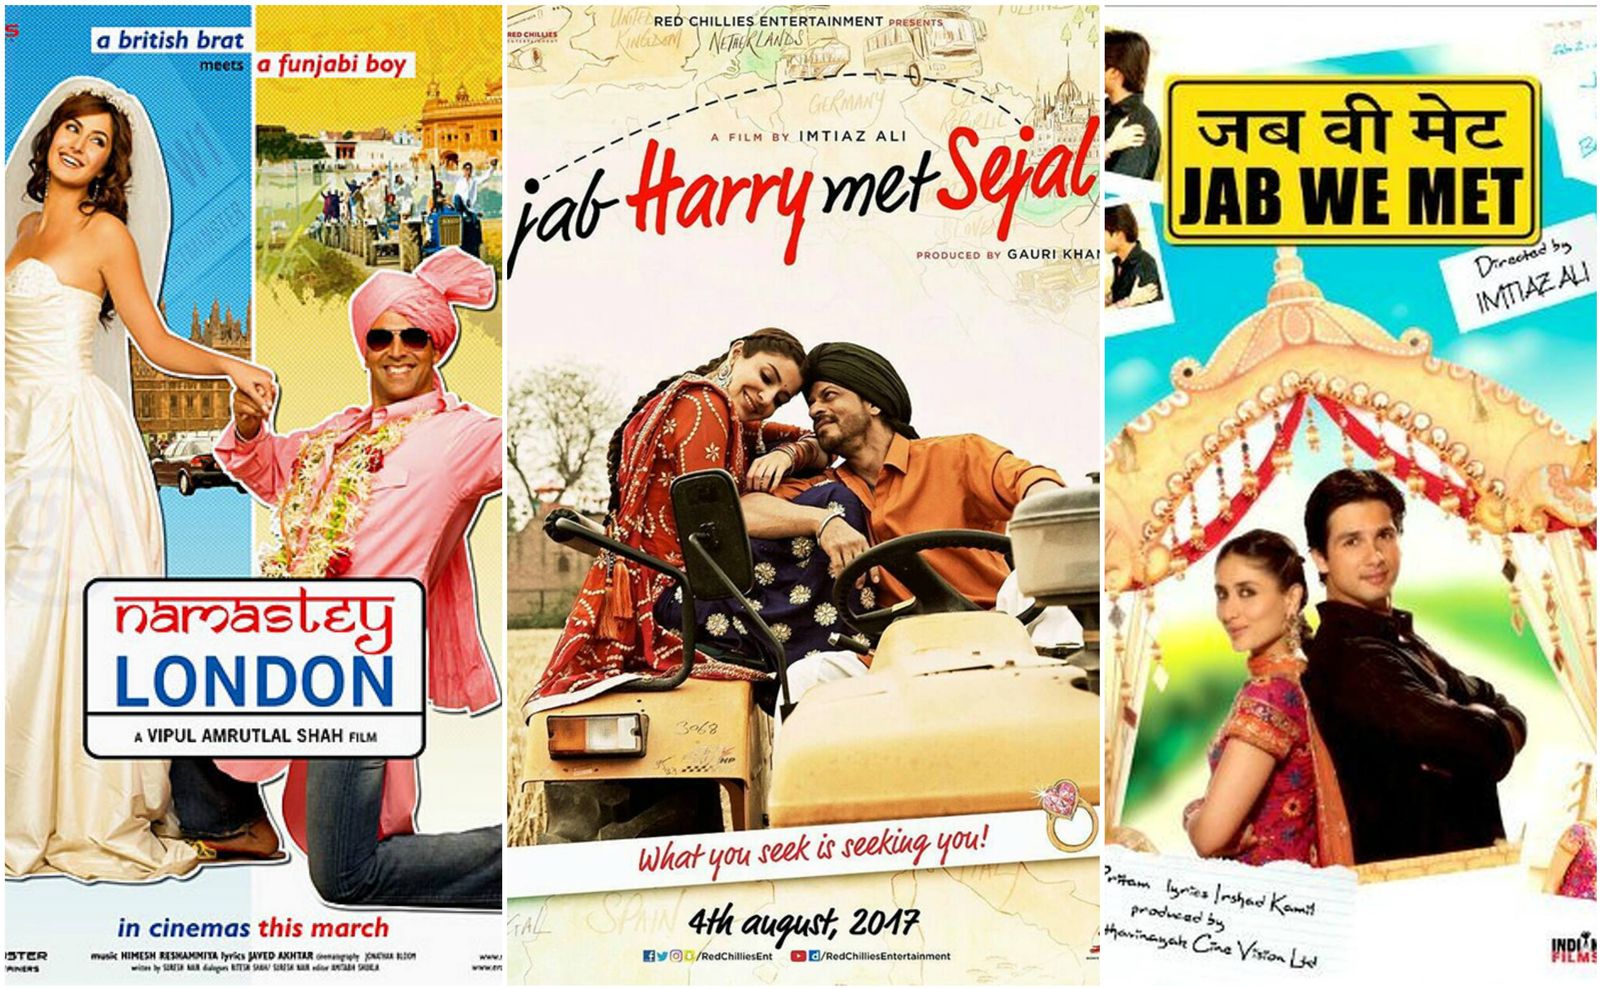 Namastey London, Jab We Met: 6 Best, Most Refreshing Romantic Comedies That Bollywood Got Right!